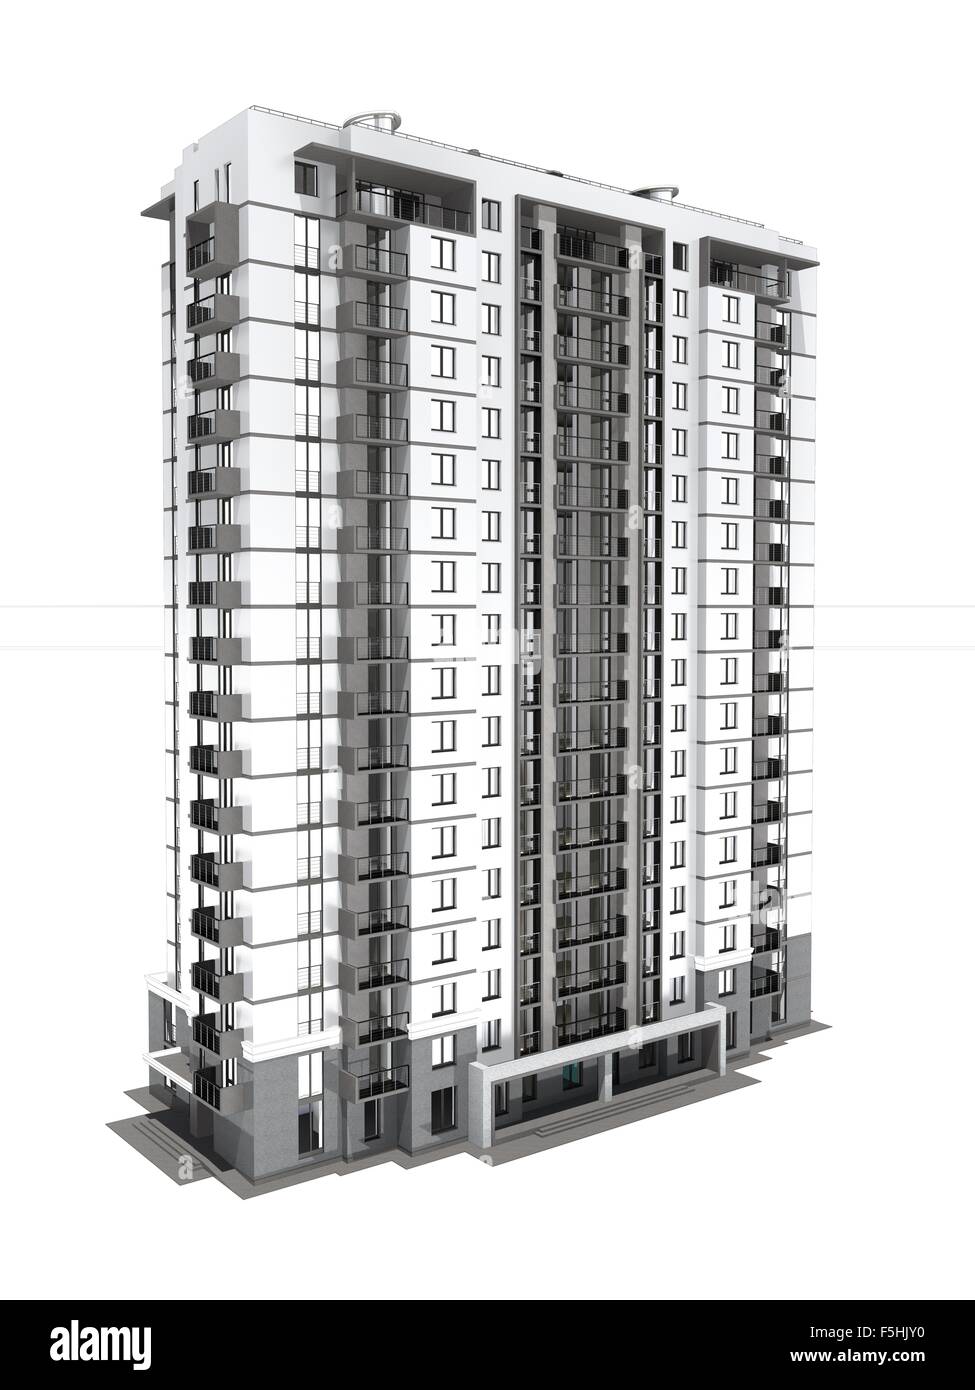 Visualization of modern multi-storey residential building Stock Photo